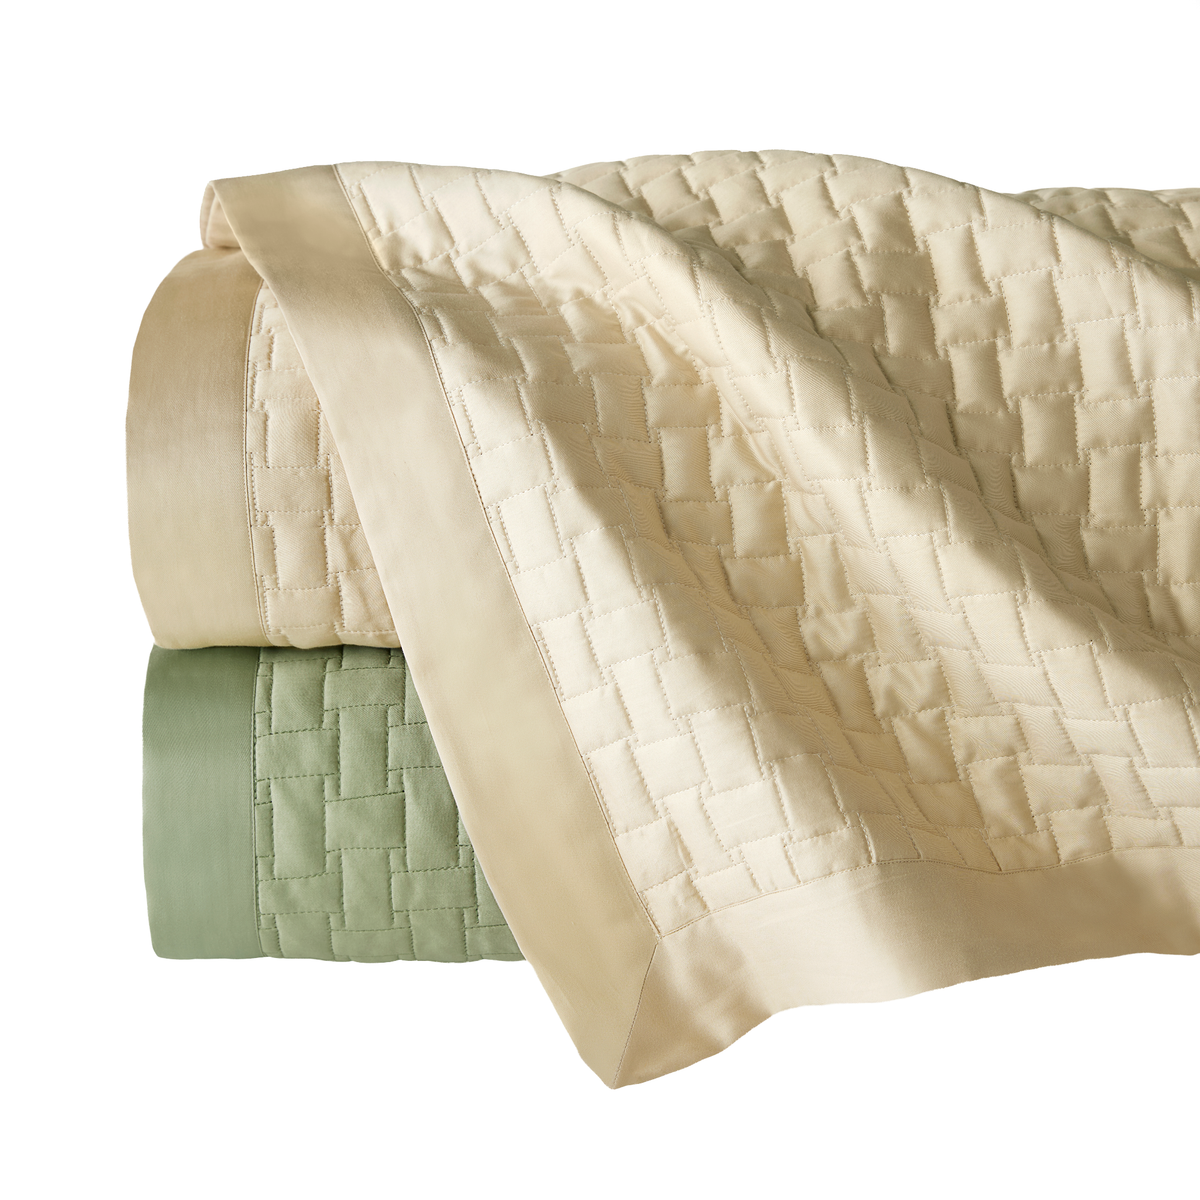 Folded Sferra Sampietrini Quilts in Willow and Sand Color